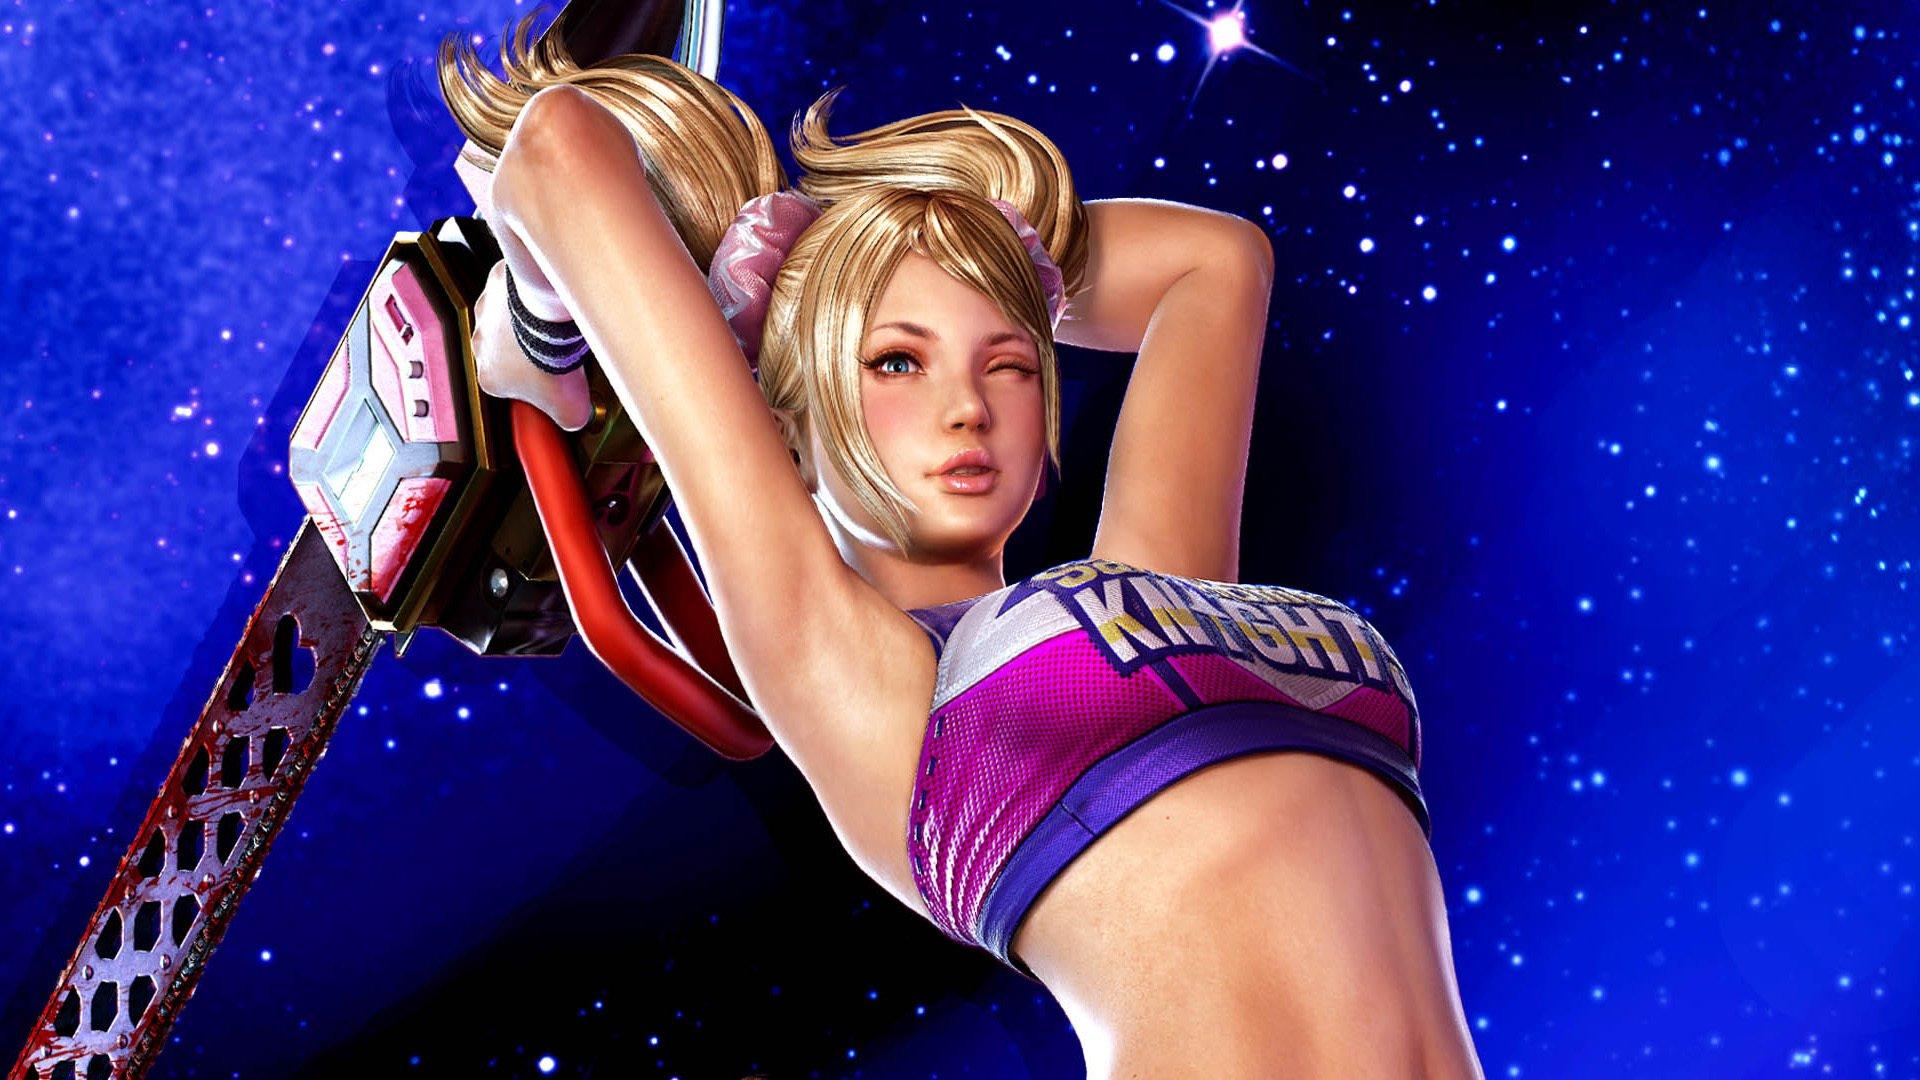 Lollipop Chainsaw HD Wallpaper and Background Image